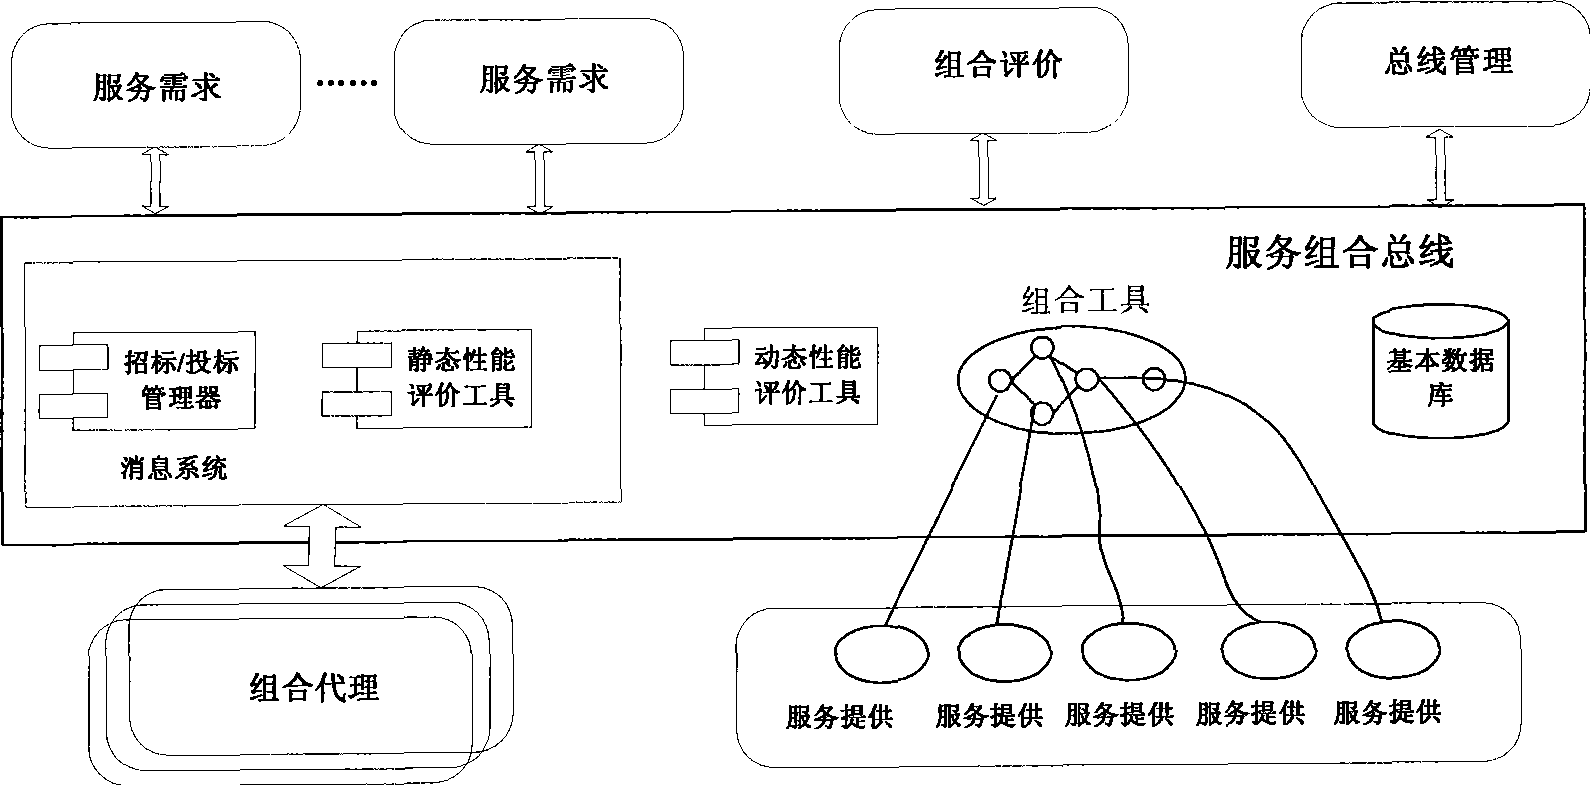 Web service combination system and method